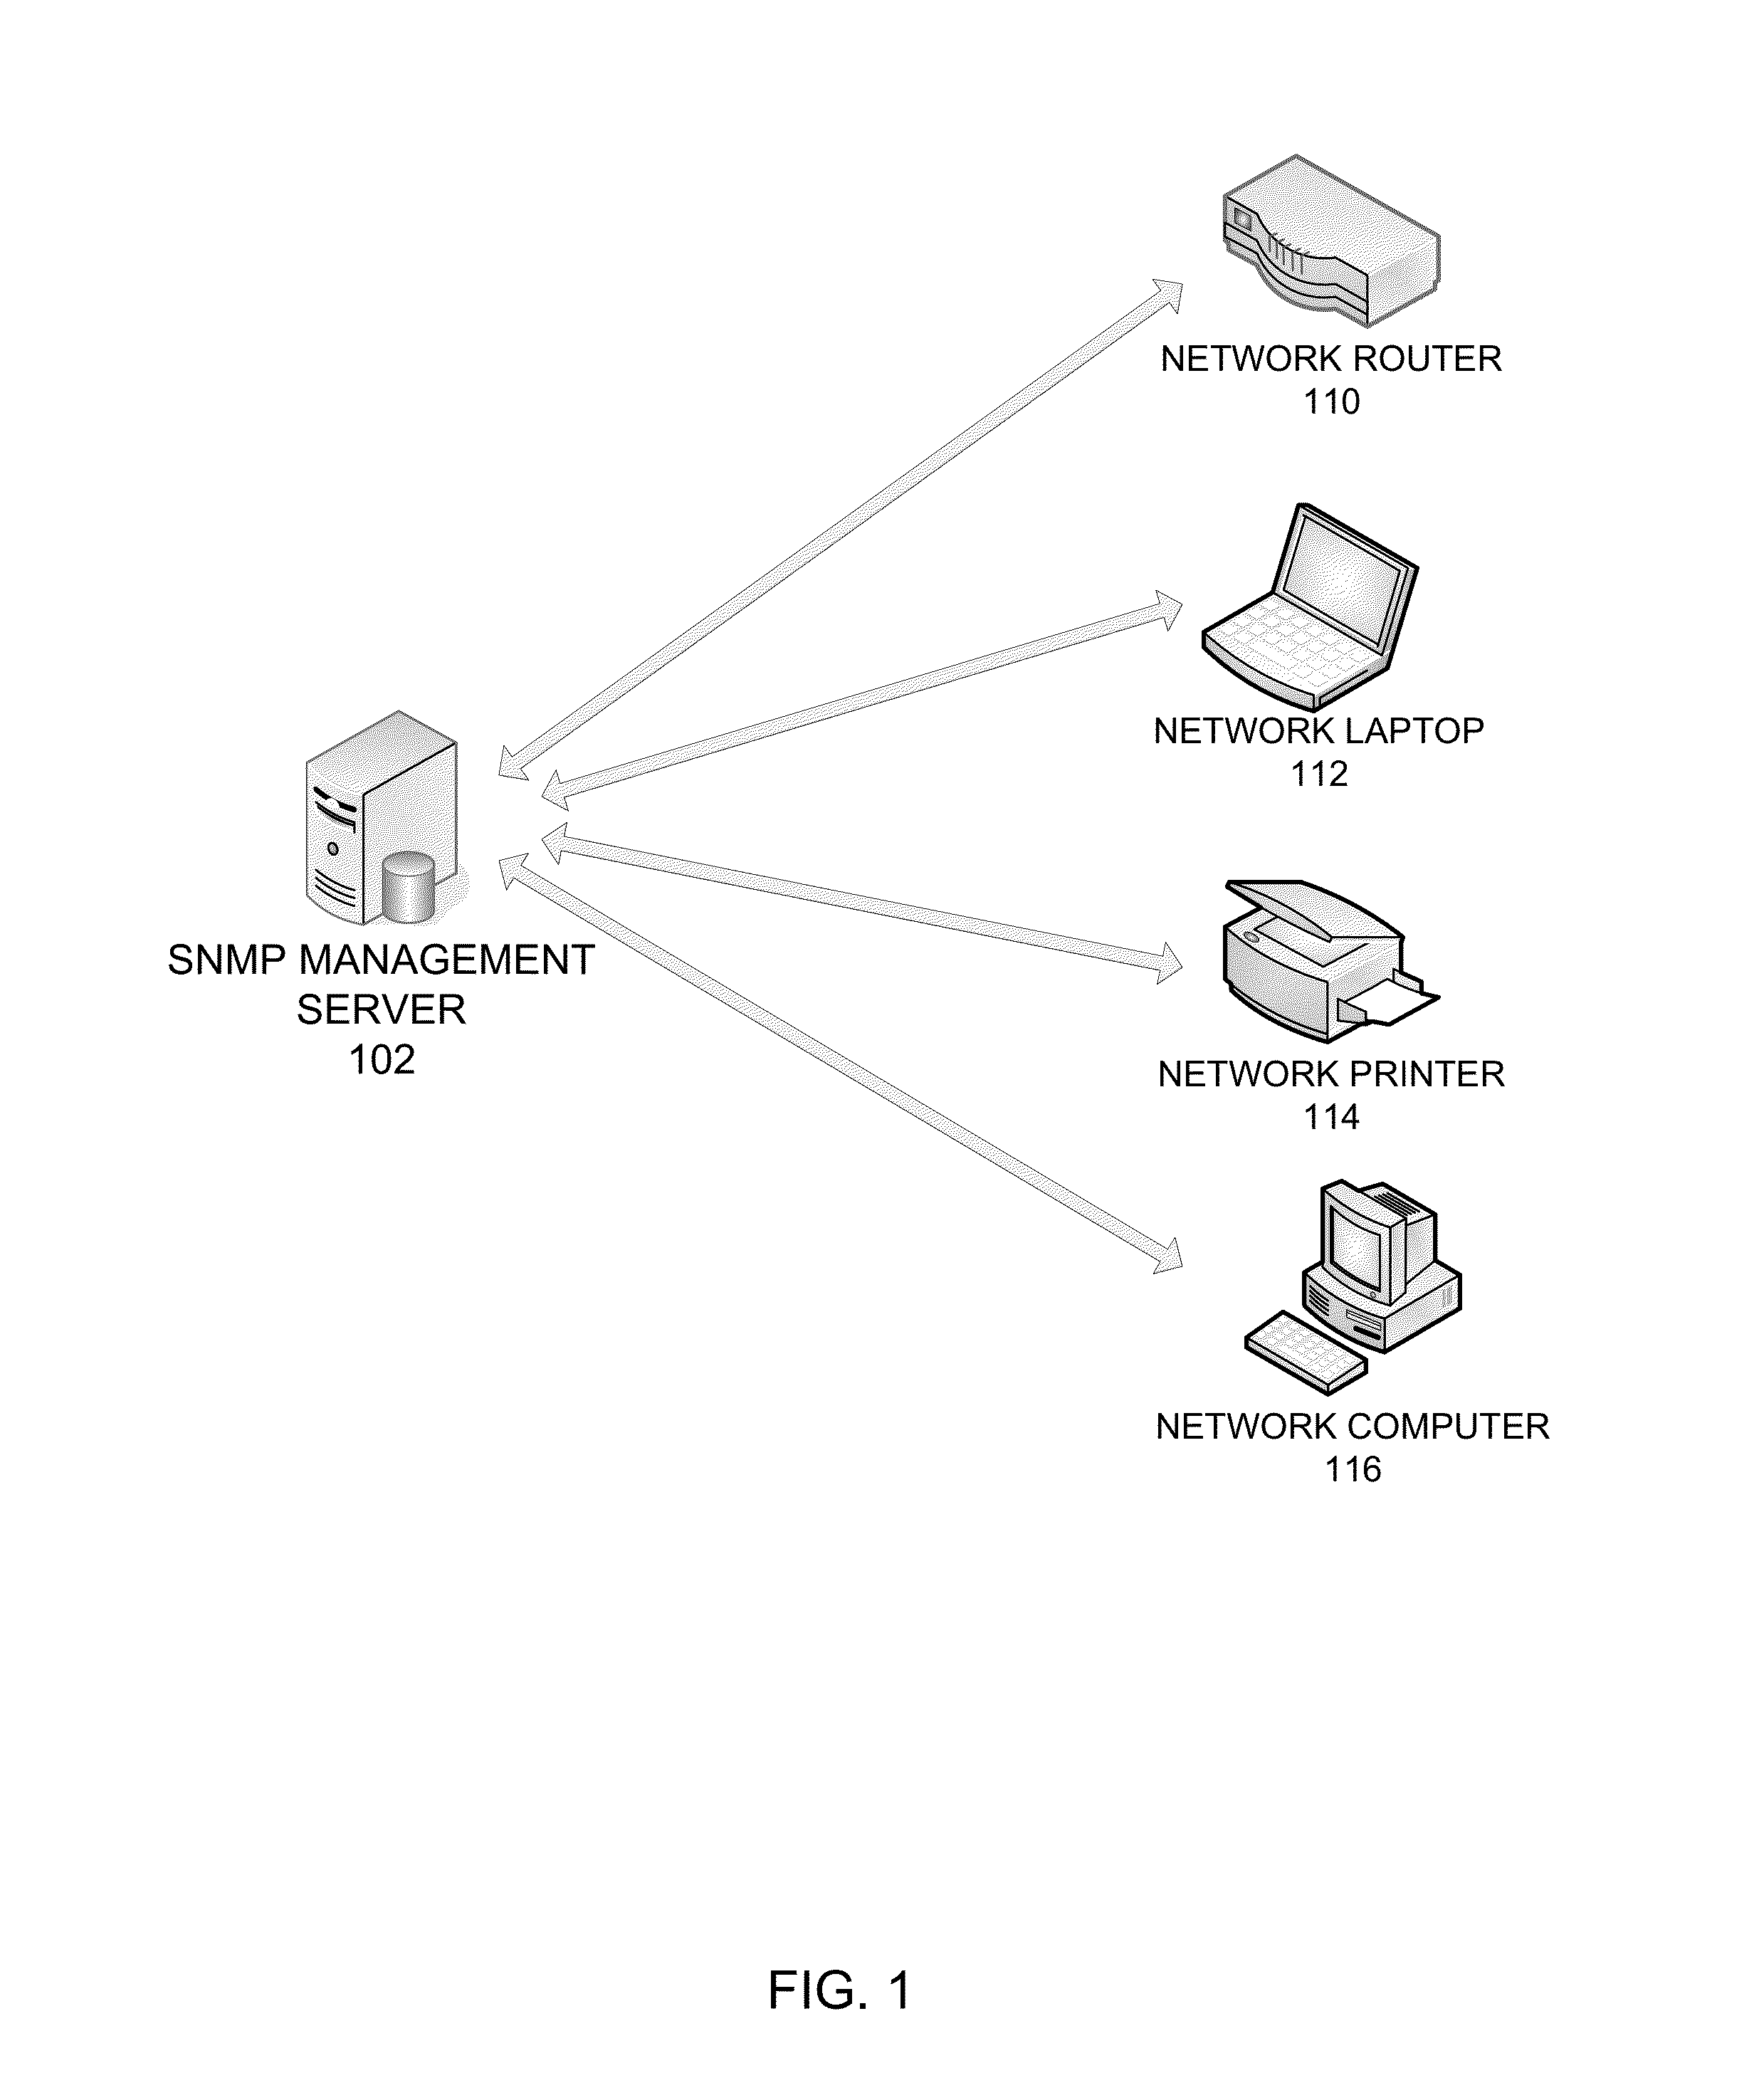 Managing a network element operating on a network